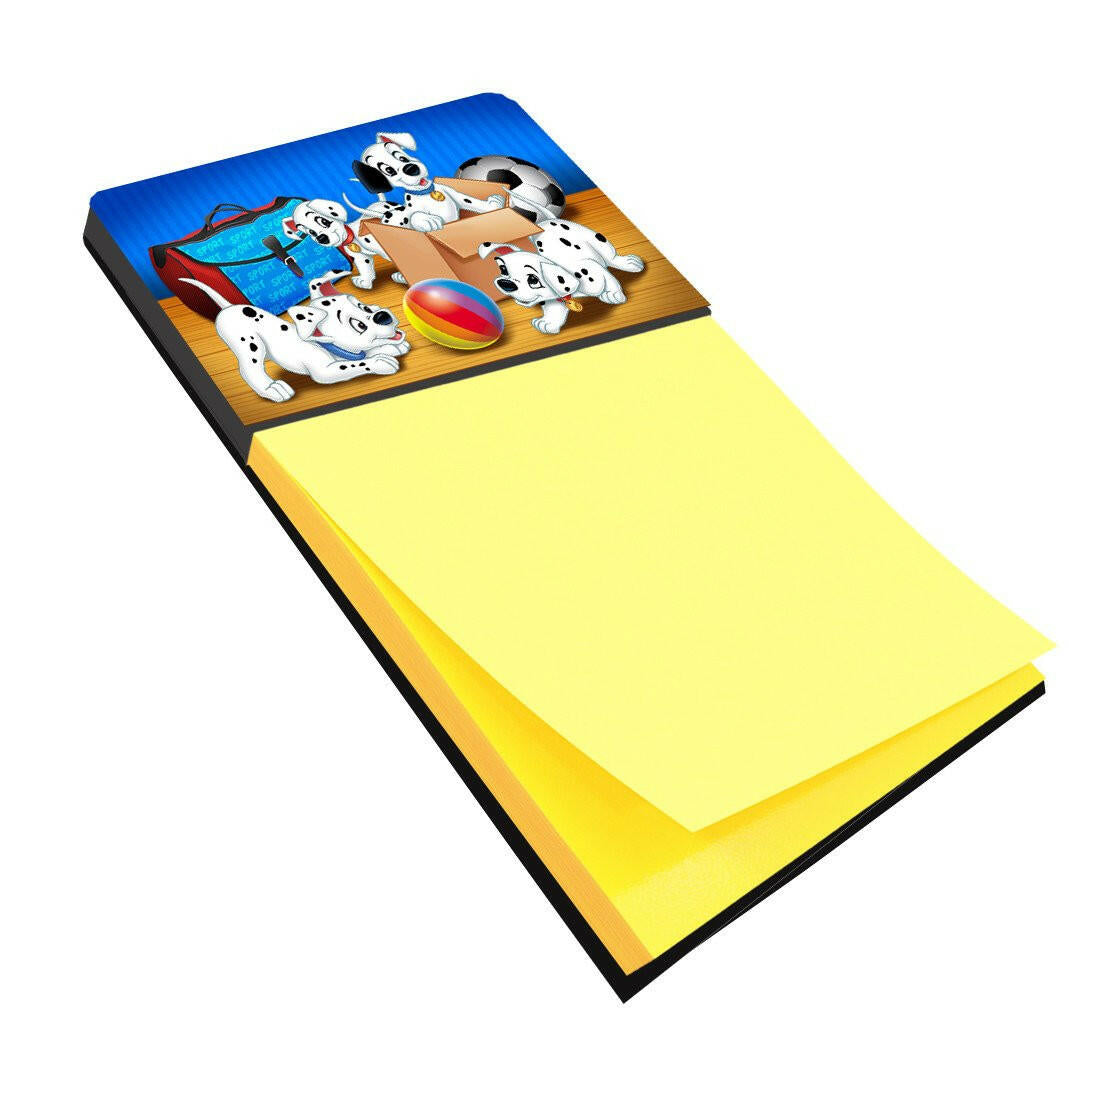 Dalmatians playing ball Sticky Note Holder APH9058SN by Caroline's Treasures